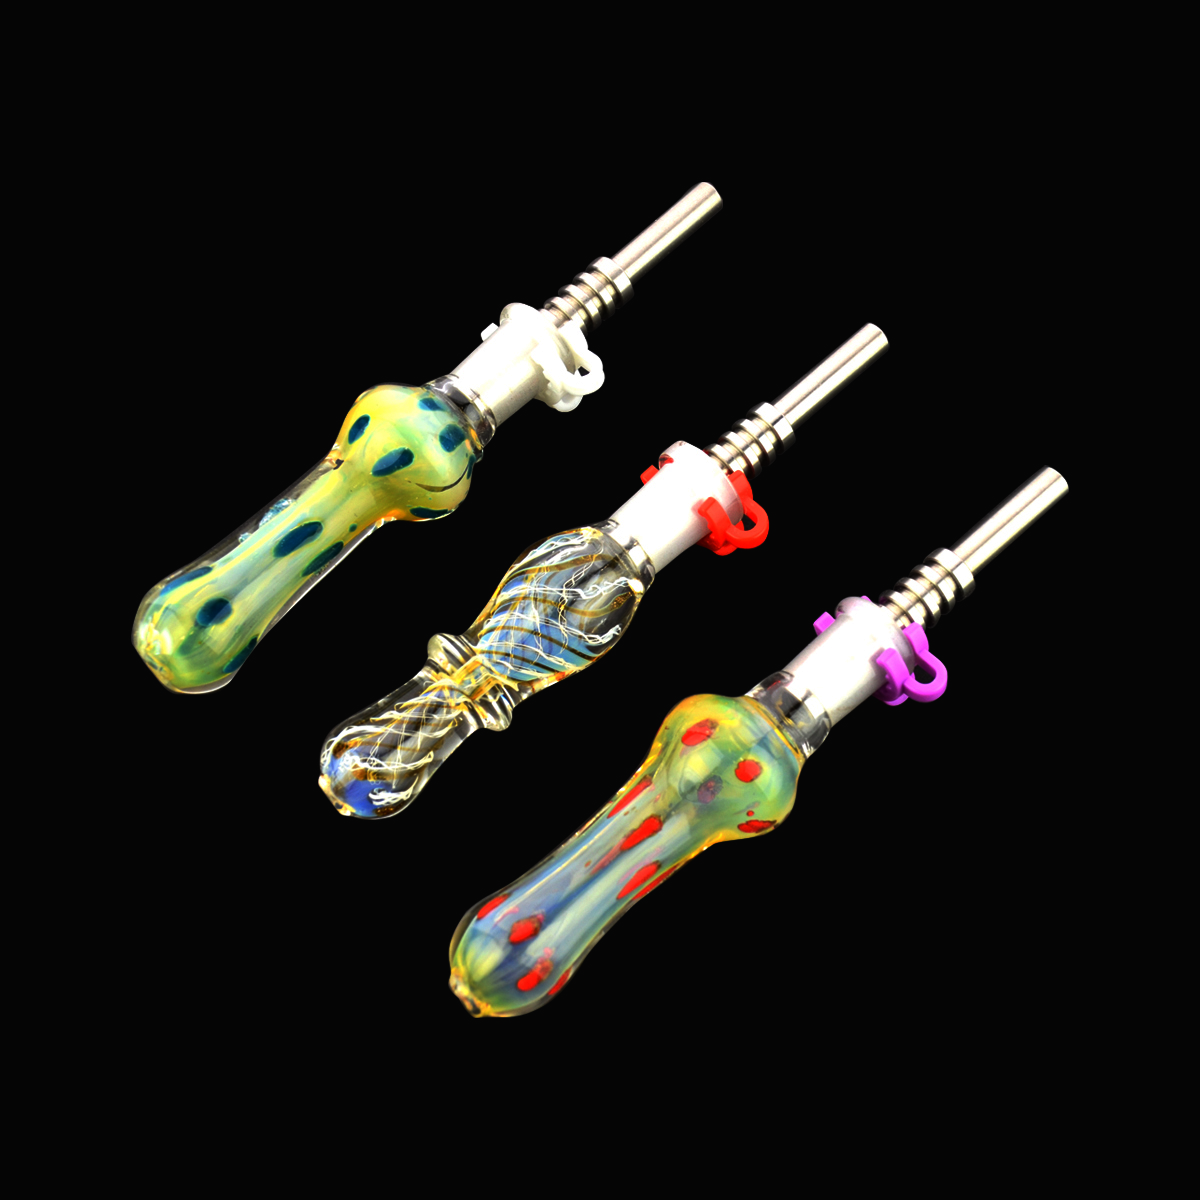 6" Dot Glass Art Nectar Collector Concentrate Straw with 14mm Plastic Clip and Titanium Nail